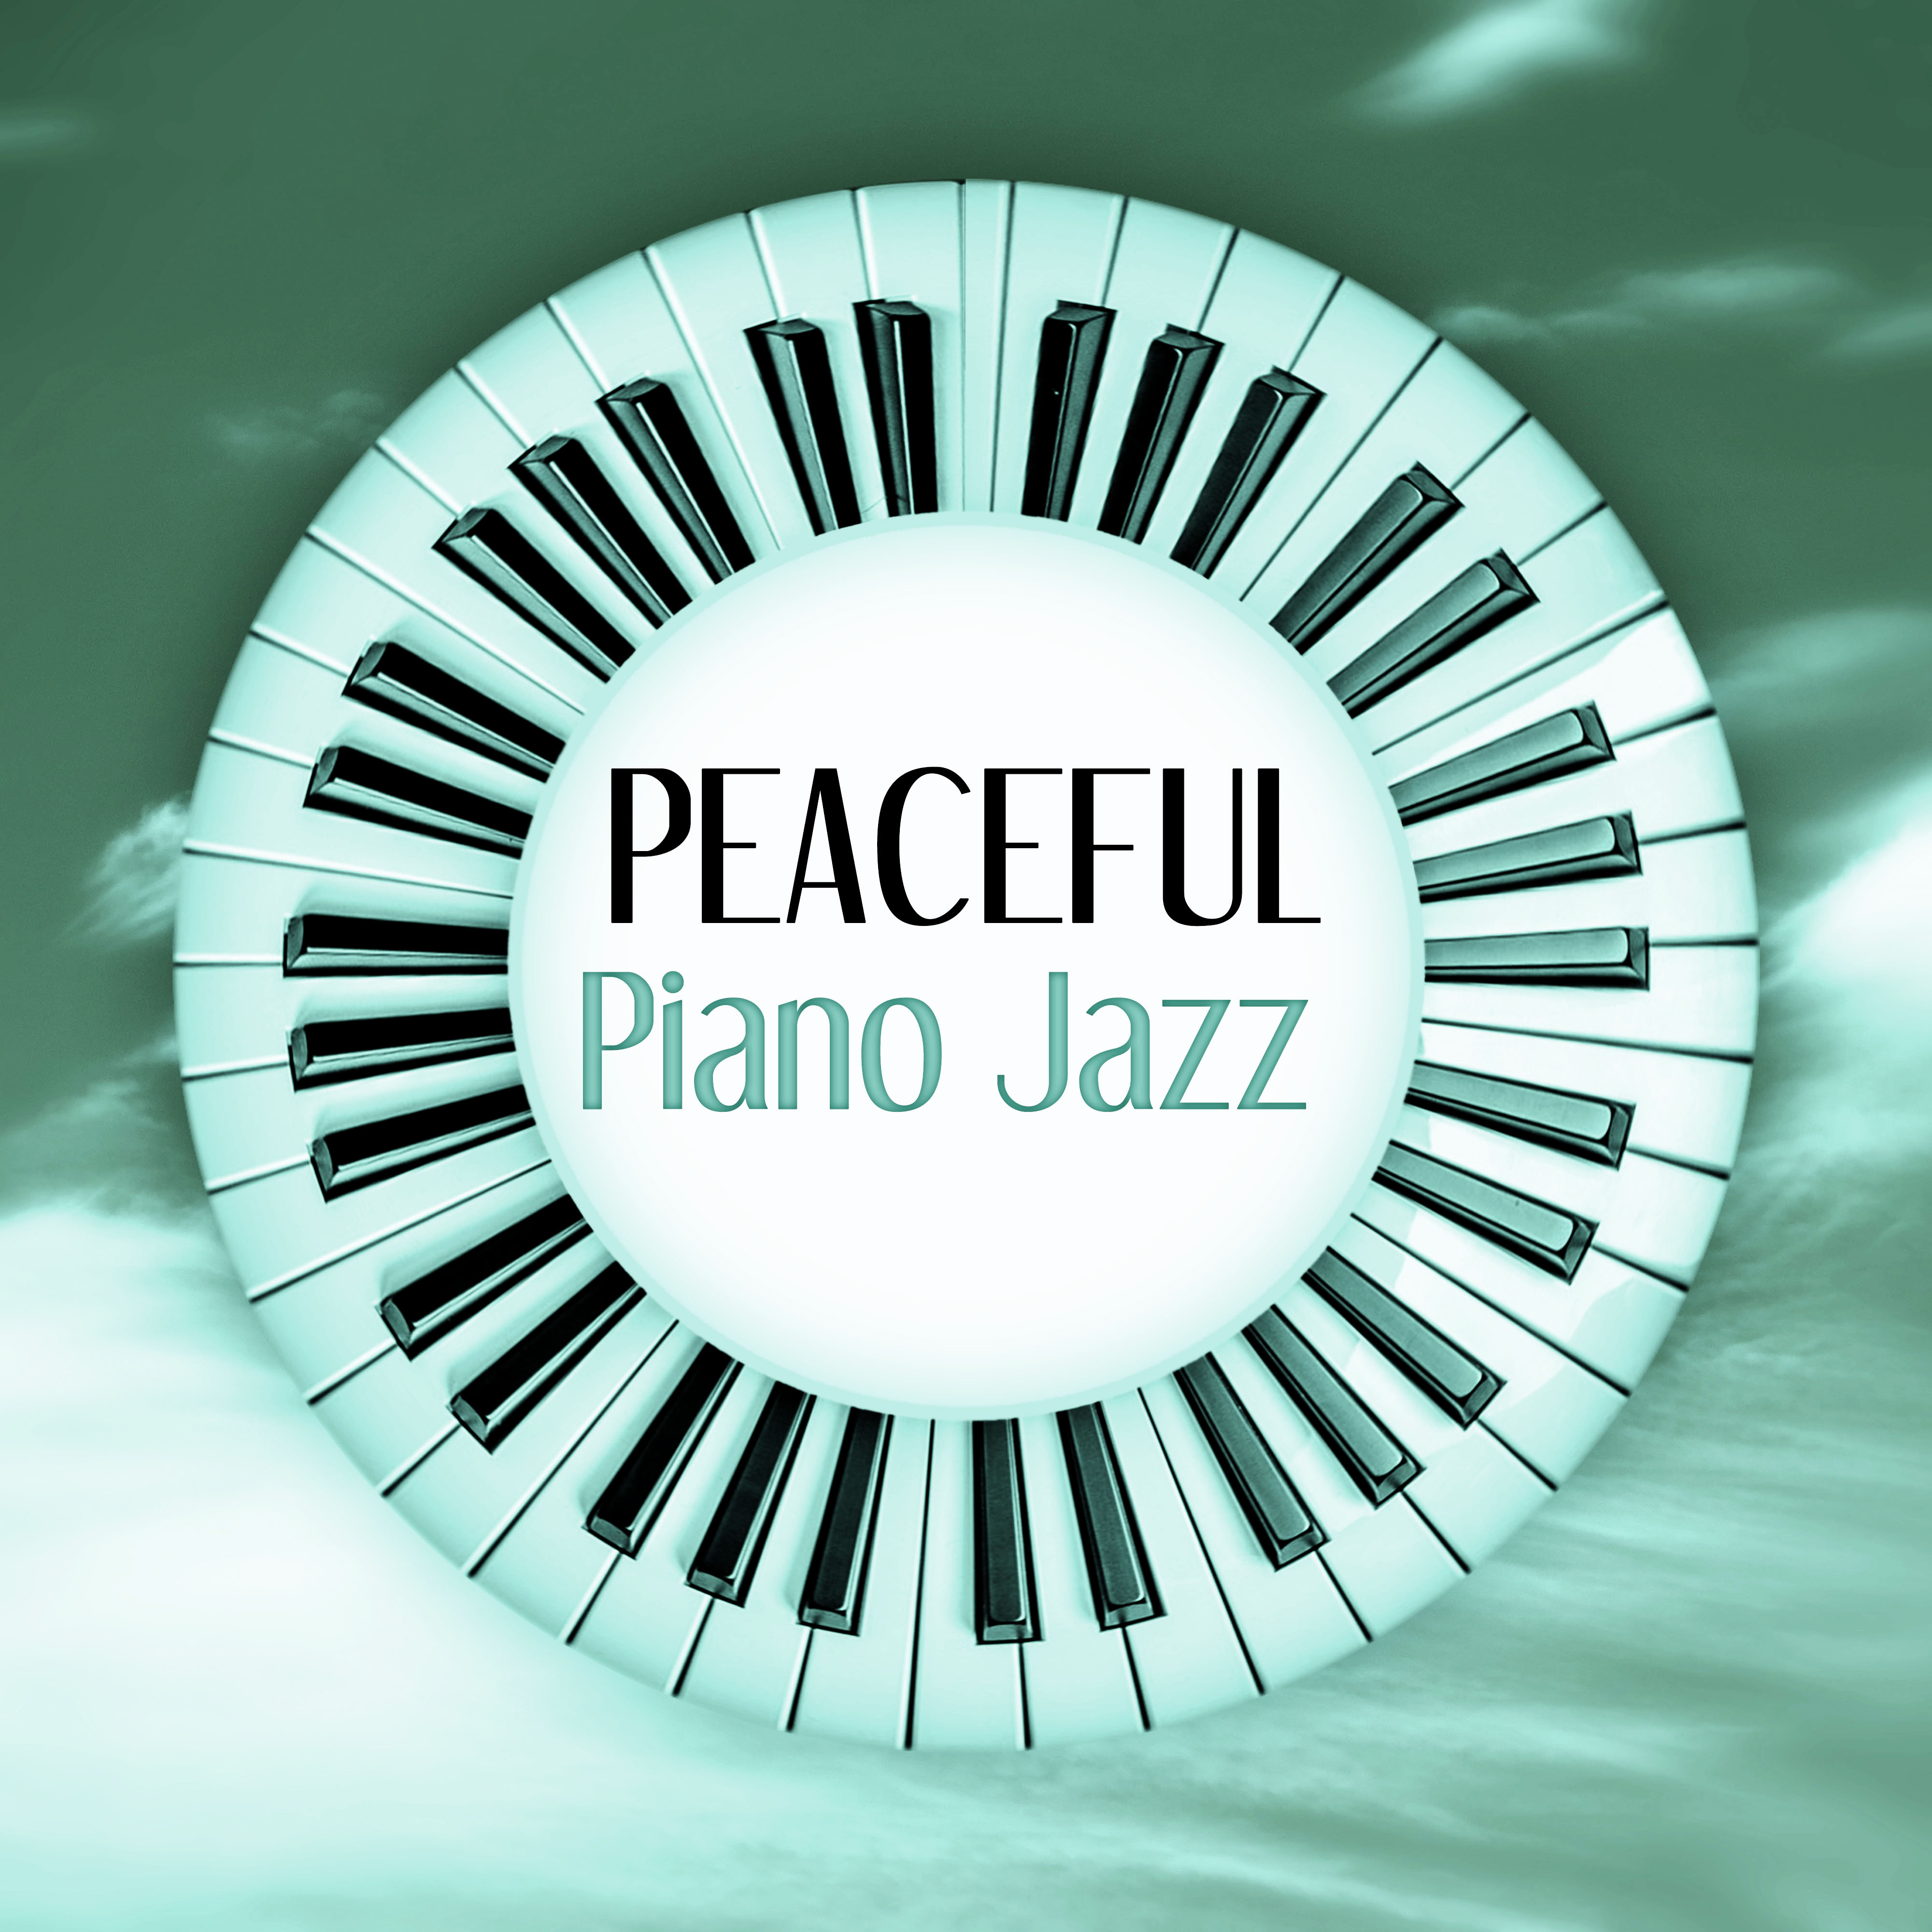 Peaceful Piano Jazz  Jazz to Relax, Relax Yourself, Piano Jazz, Piano Sounds for Stress Relief, Background Music to Relax, Beautiful Moments